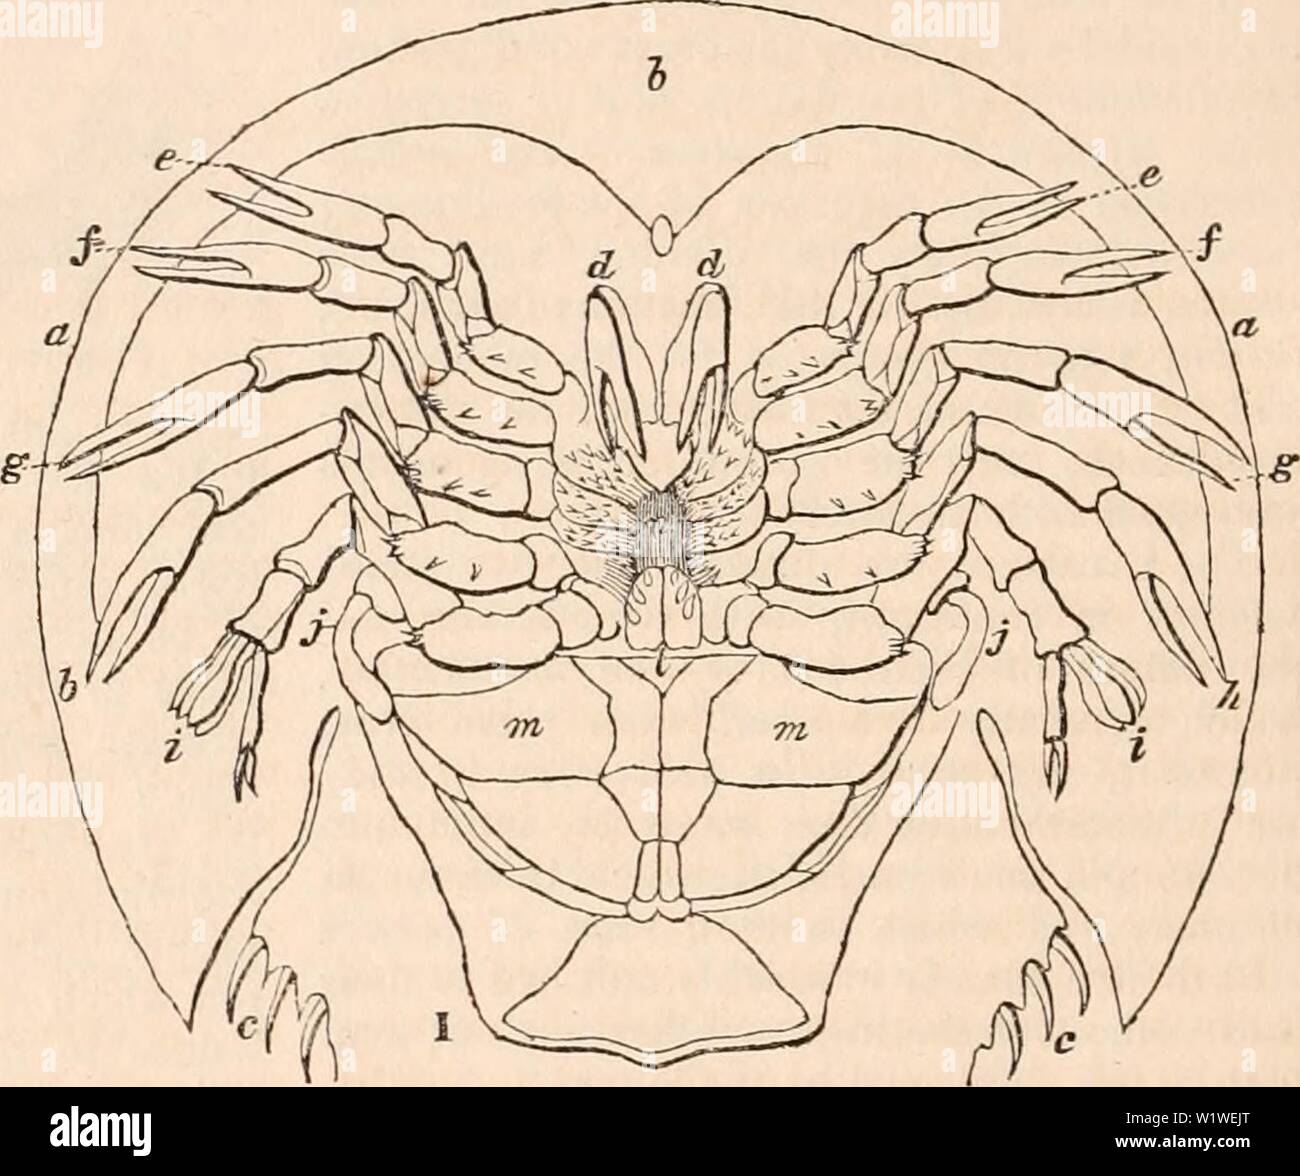 Archive image from page 787 of The cyclopædia of anatomy and. The cyclopædia of anatomy and physiology  cyclopdiaofana01todd Year: 1836 Limulus polypheaua, (ventral aspect.) a, carapace; b, frontal portion of the carapace; c, thorax ; d, chelifera; e,f, y, h, i,.j, legs, the basilar portions of which surround the mouth and act as mandibles ; /, under-lip ; m, branchial or lamellii'orm appendages ; n, mouth. itself under the shape of two thin and much expand- ed laminae which serve as a kind of broad operculum to cover the whole of the oral apparatus. Starting from this complication of structur Stock Photo